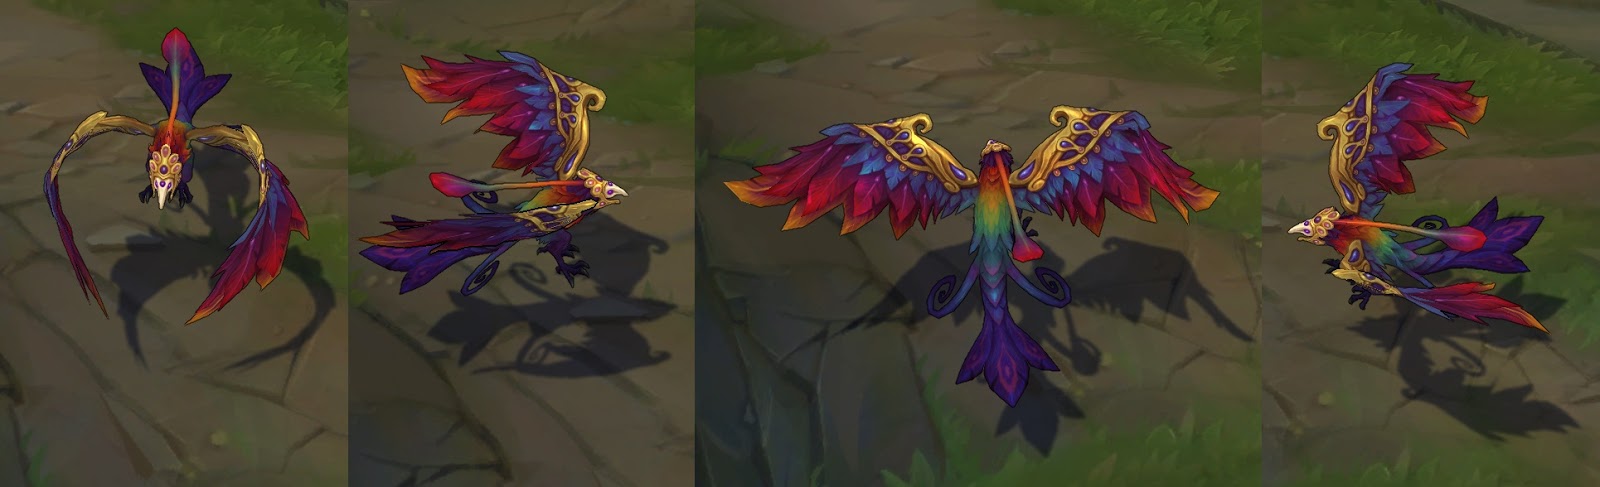 Festival Queen Anivia skin for league of legends ingame picture